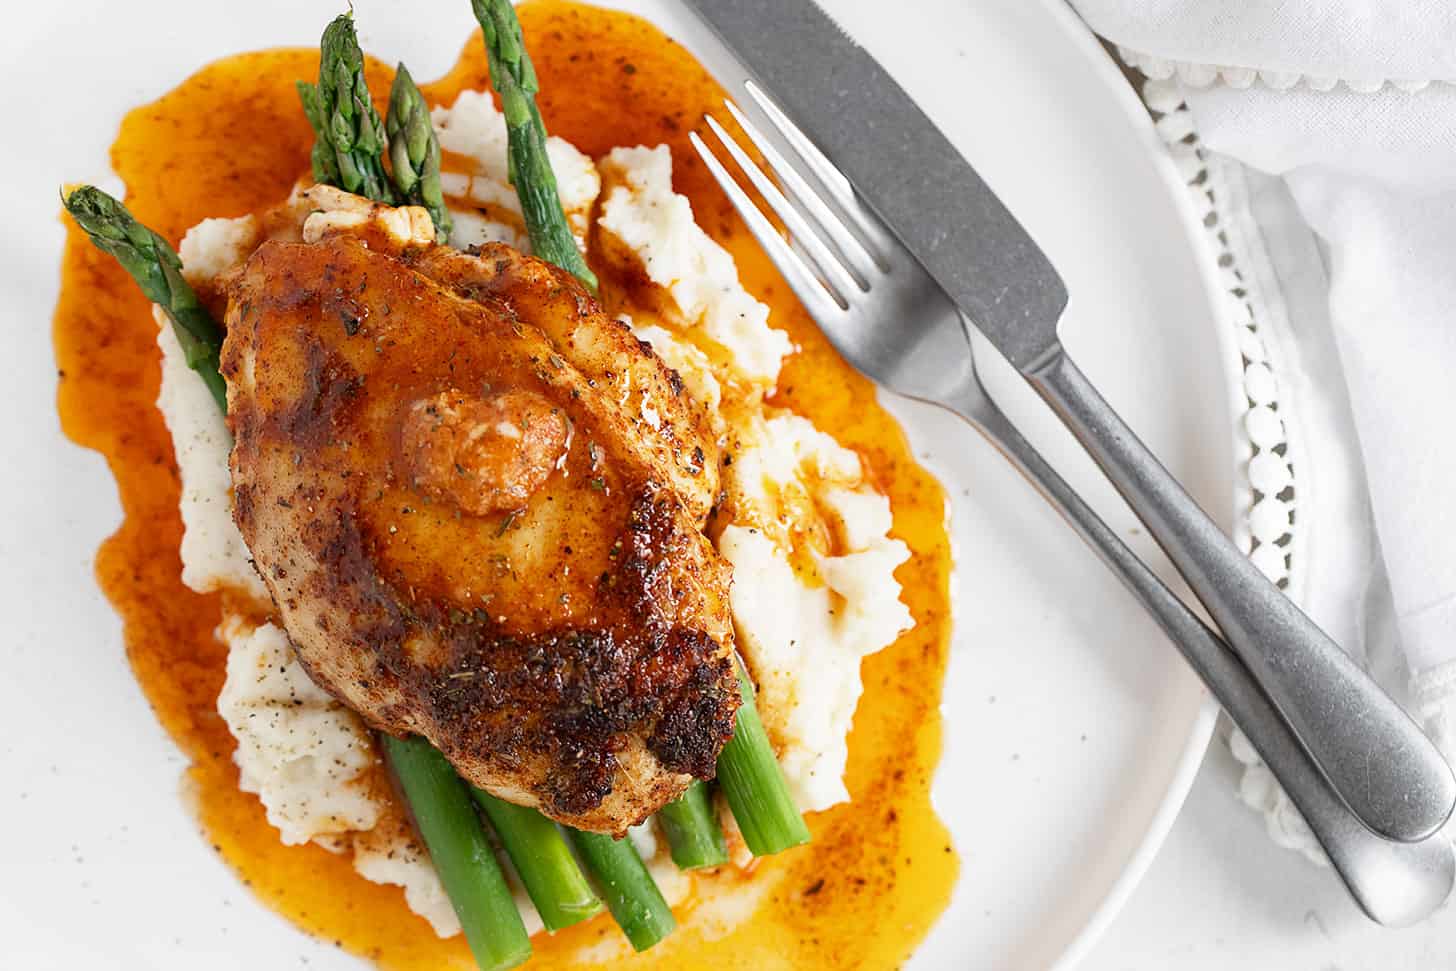 Cajun chicken on plate with mashed potatoes and asparagus.